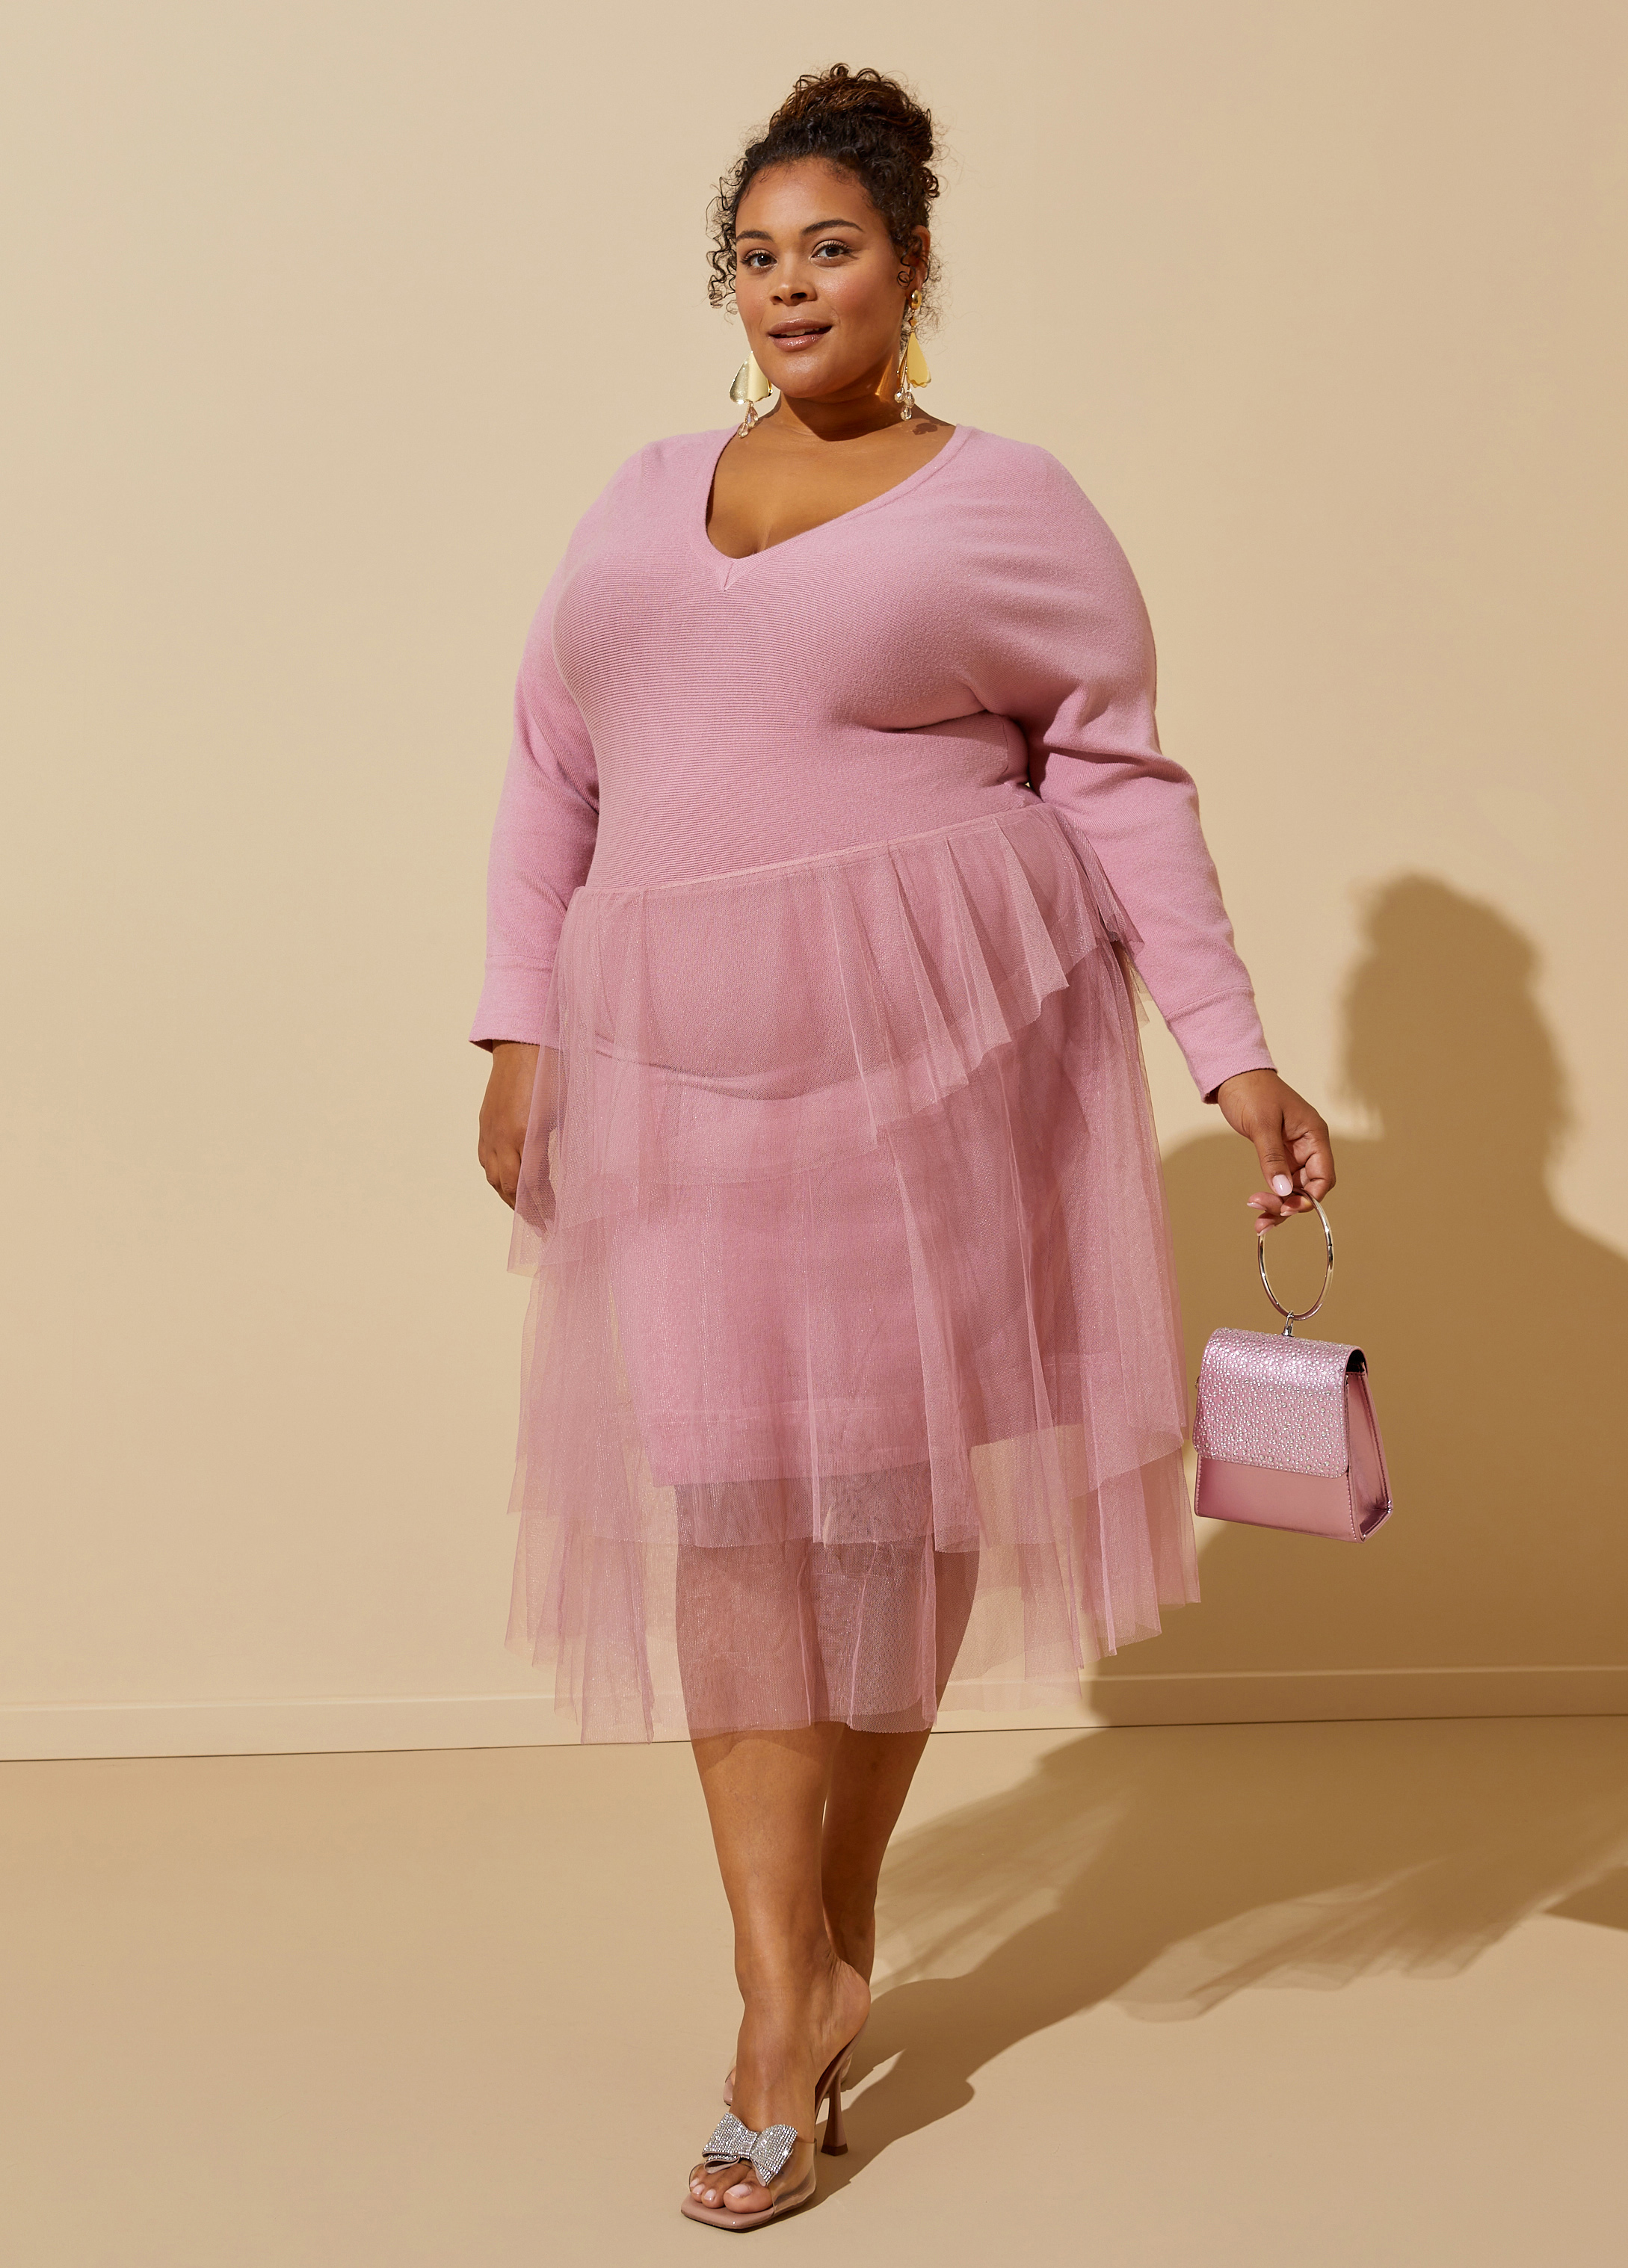 Plus Size Tiered Tulle Skirt Sweater Dress, PINK, 22/24 - Ashley Stewart